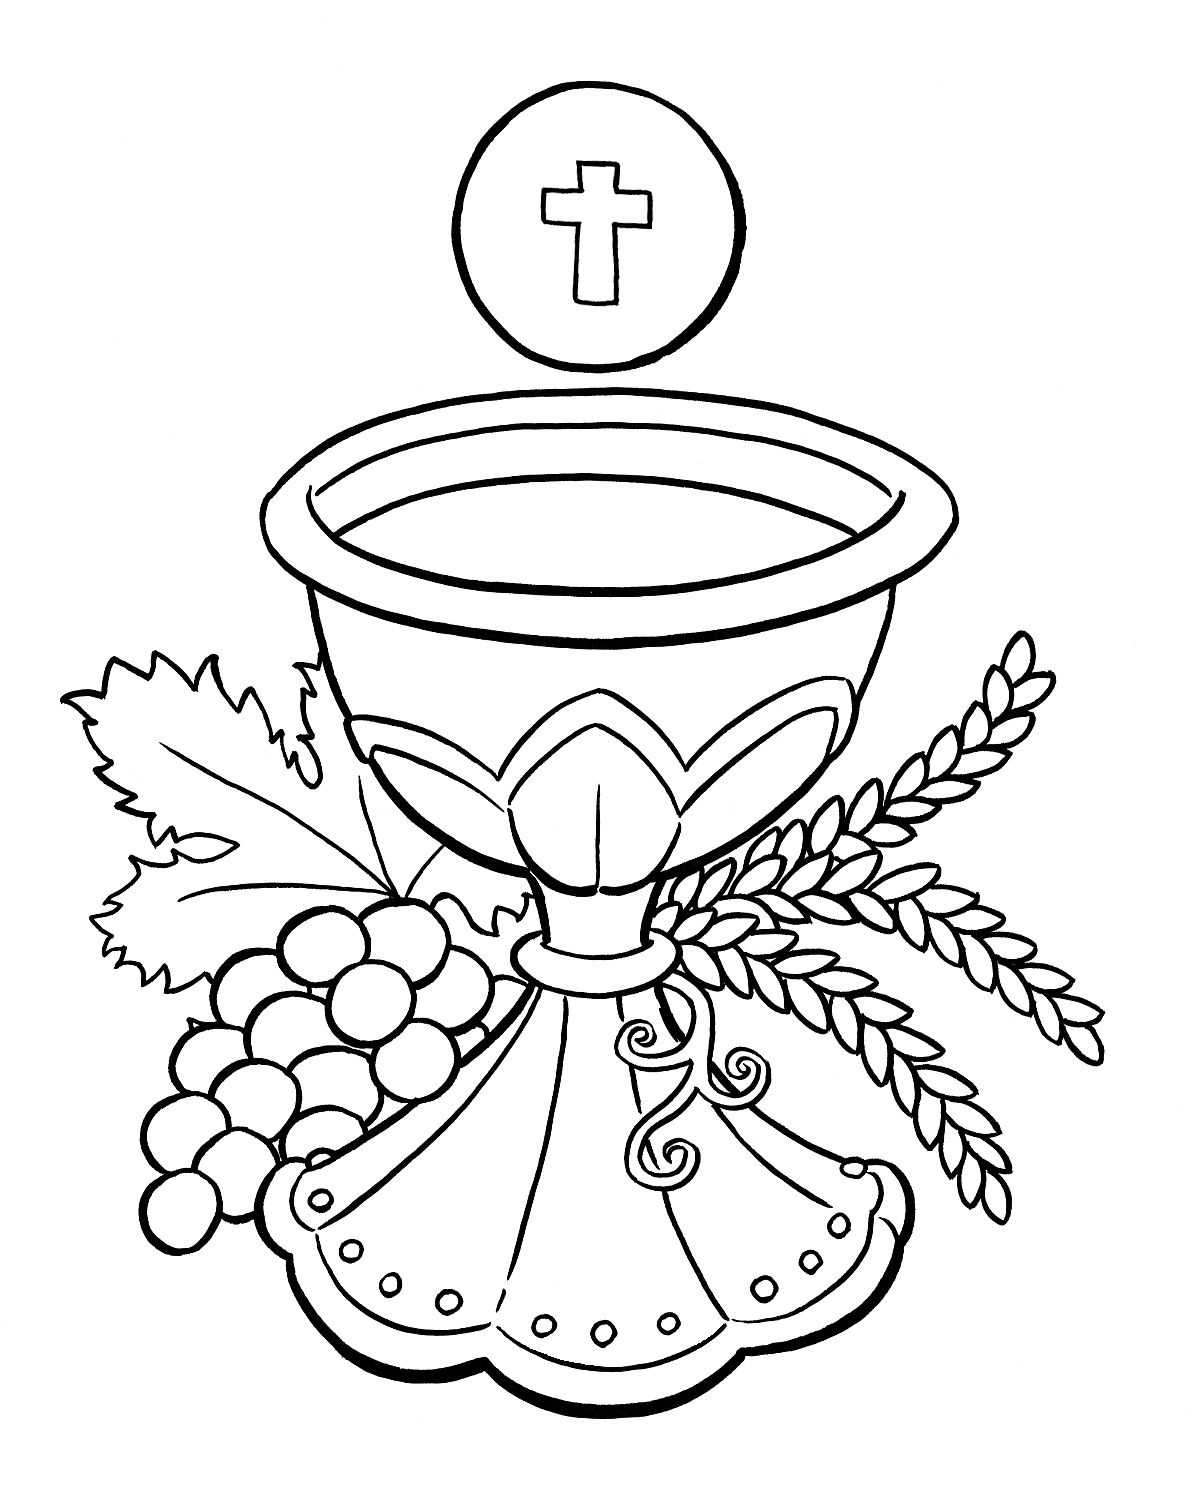 First Communion Coloring Pages At Getdrawings | Free Download With Regard To Free Printable First Communion Banner Templates